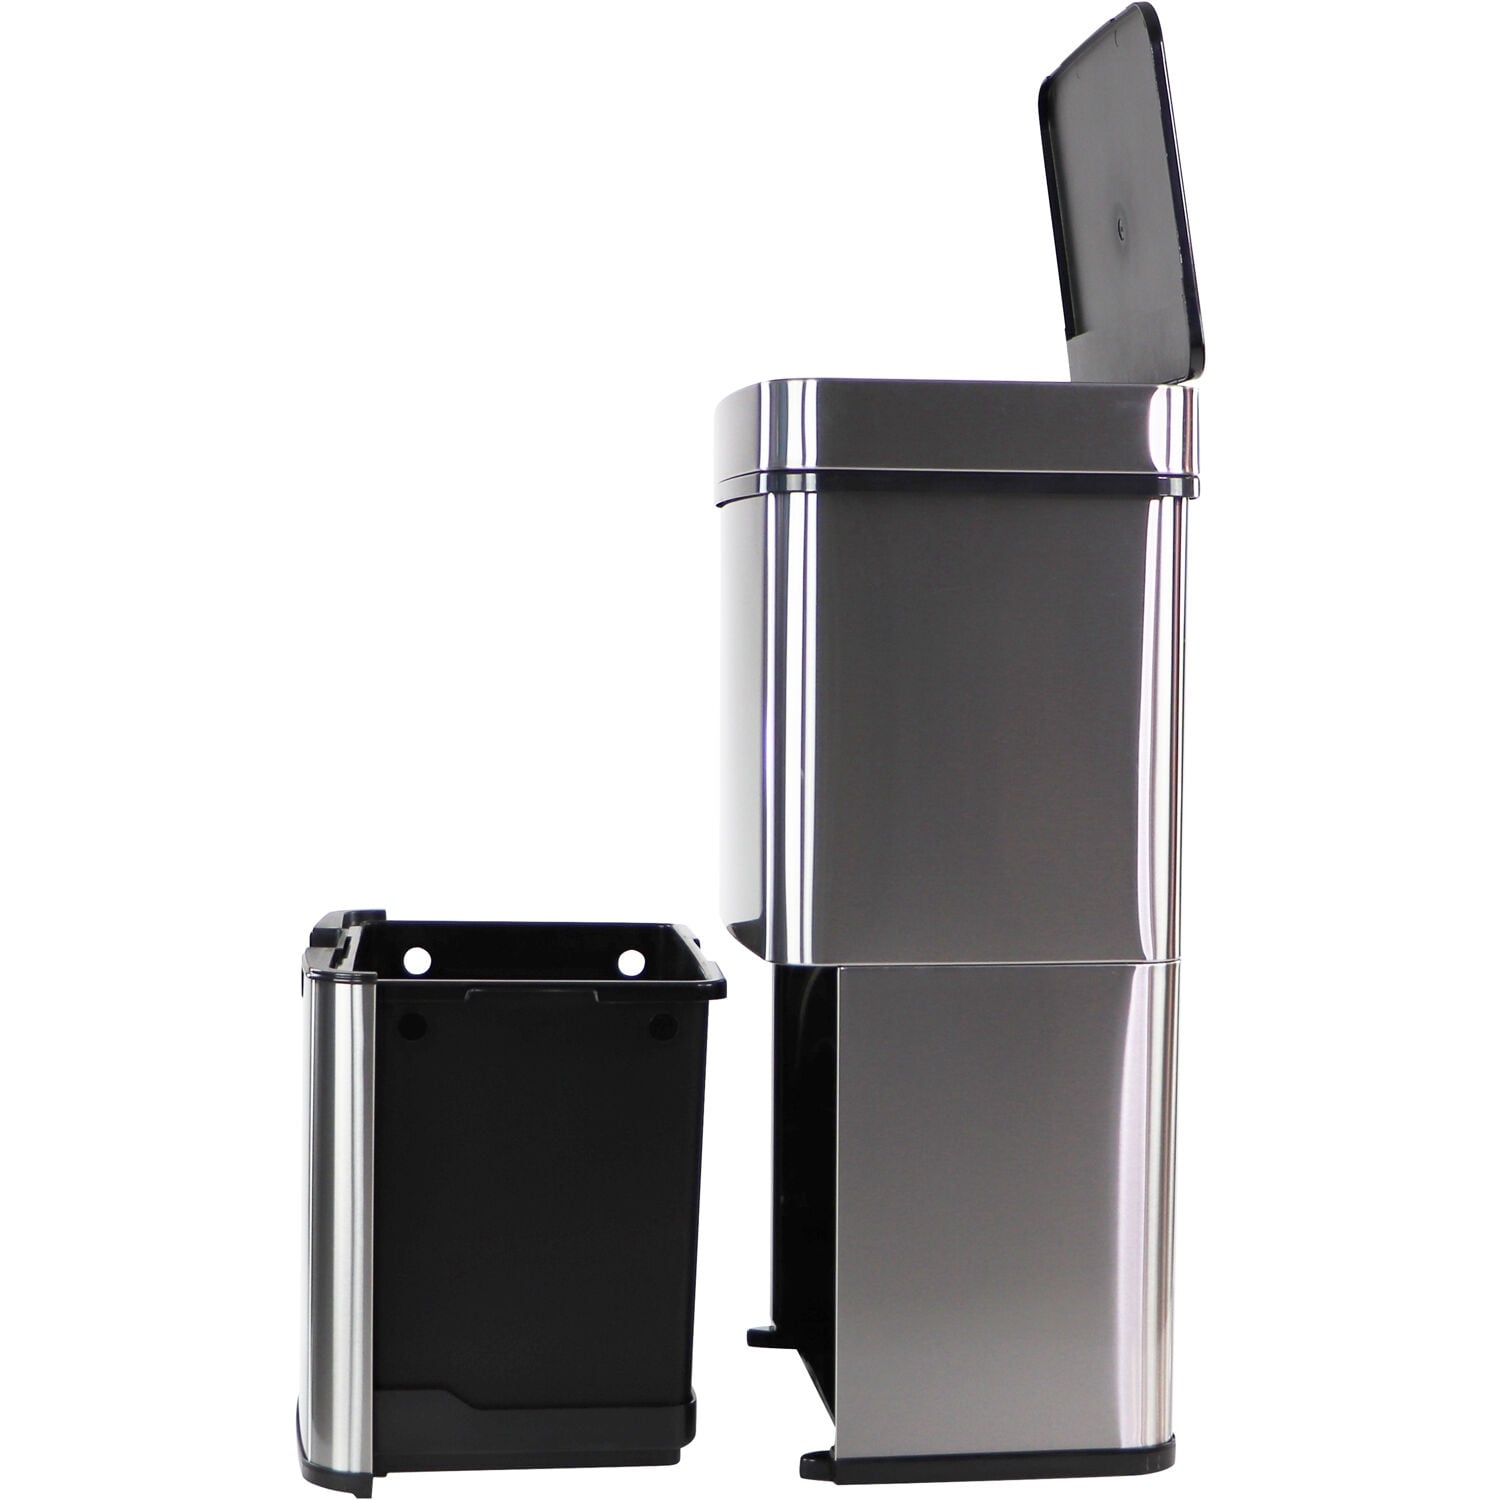 https://ak1.ostkcdn.com/images/products/is/images/direct/092cd9bd6568b38d8c4b33c9d55cade4ab4bf3b5/Hanover-62-Liter---16.4-Gallon-Trash-Can-with-Dual-Bins-and-Sensor-Lid-in-Stainless-Steel.jpg